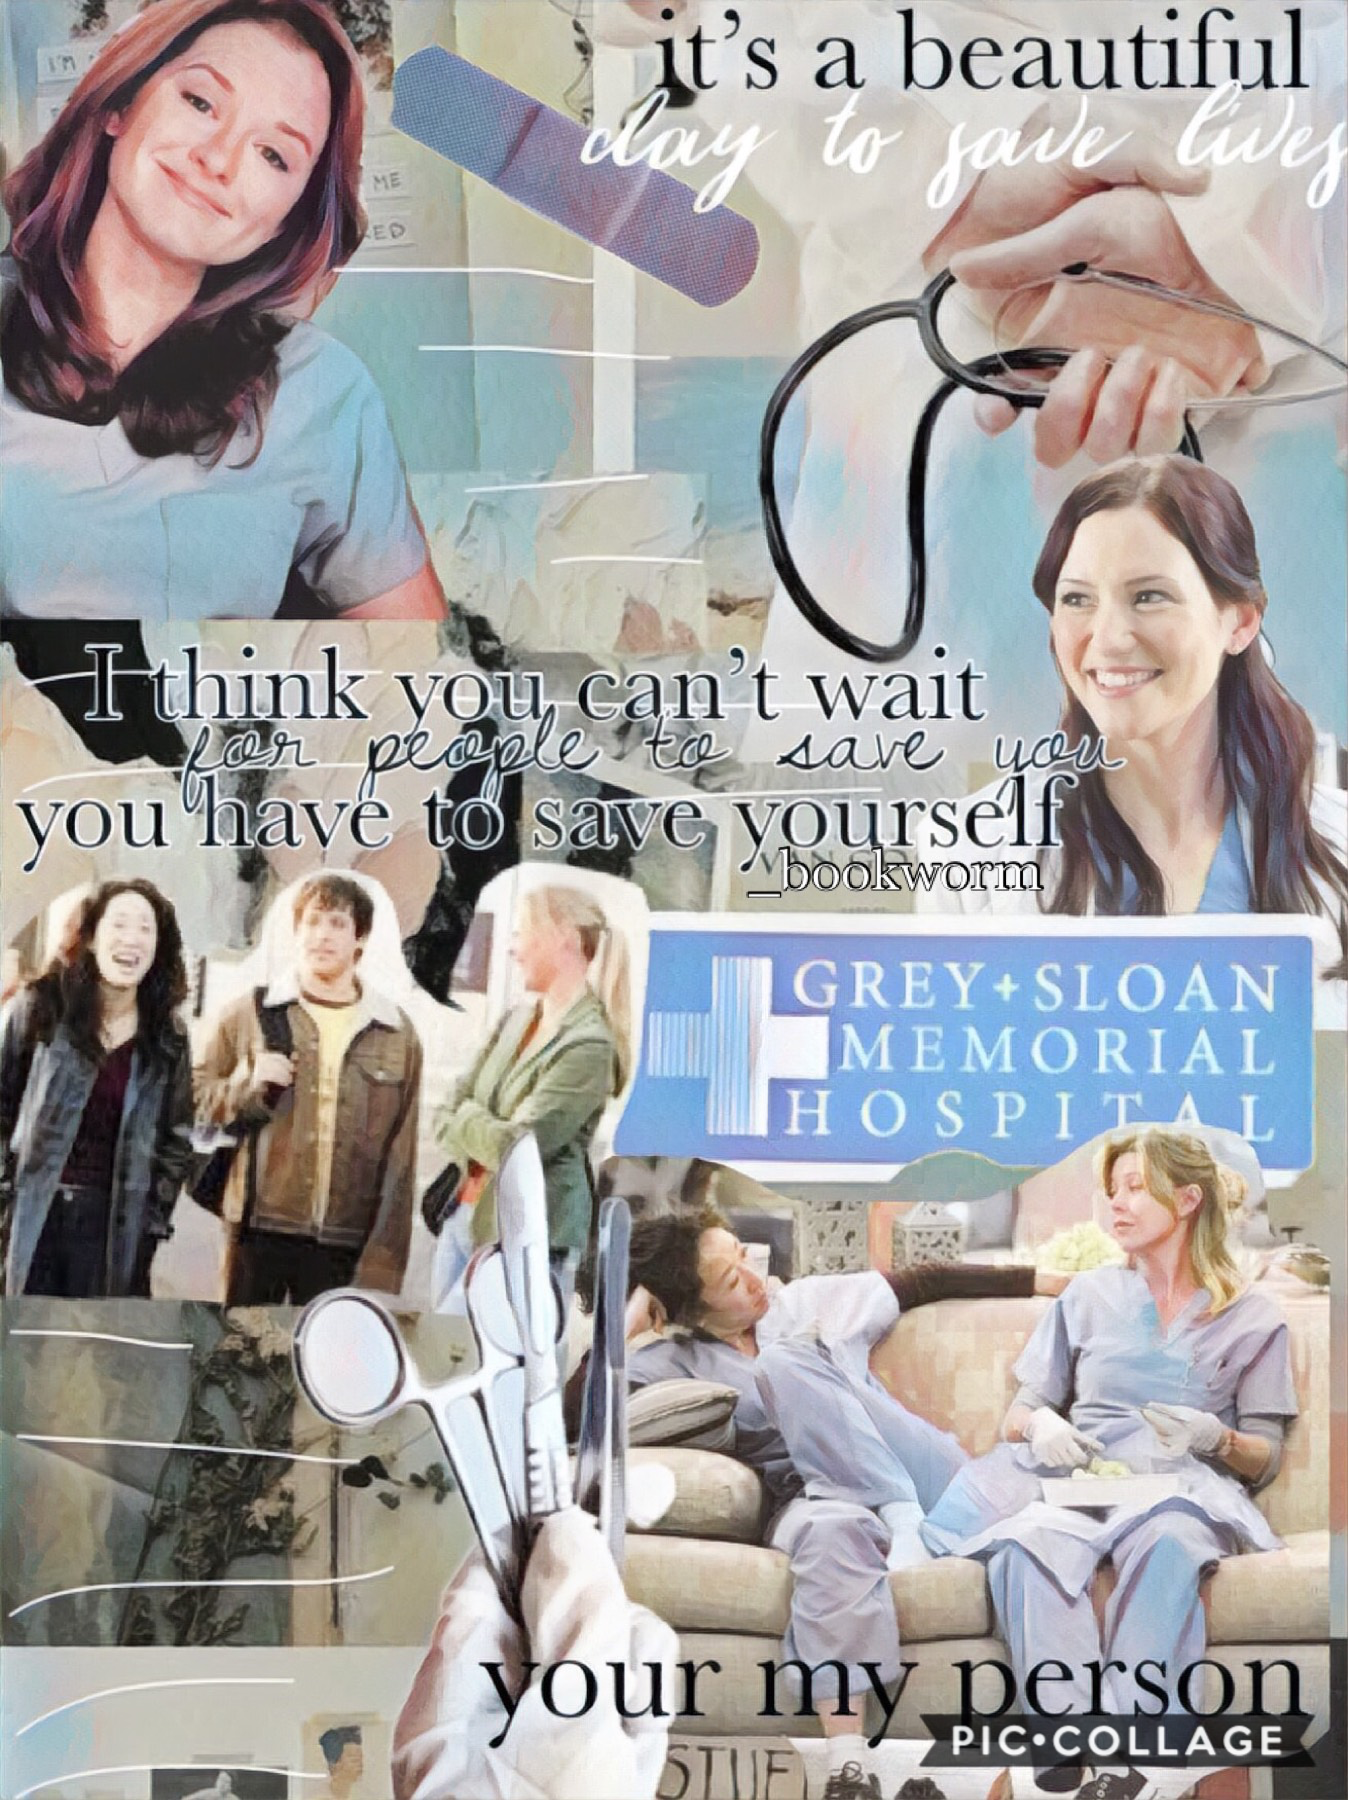 -tap-
so yes I am back from camp
It was loads of fun anywho this is a greys anatomy edit which is practically one of my favorite shows like ever and yeah
I hope you guys have a good day 
✨💞